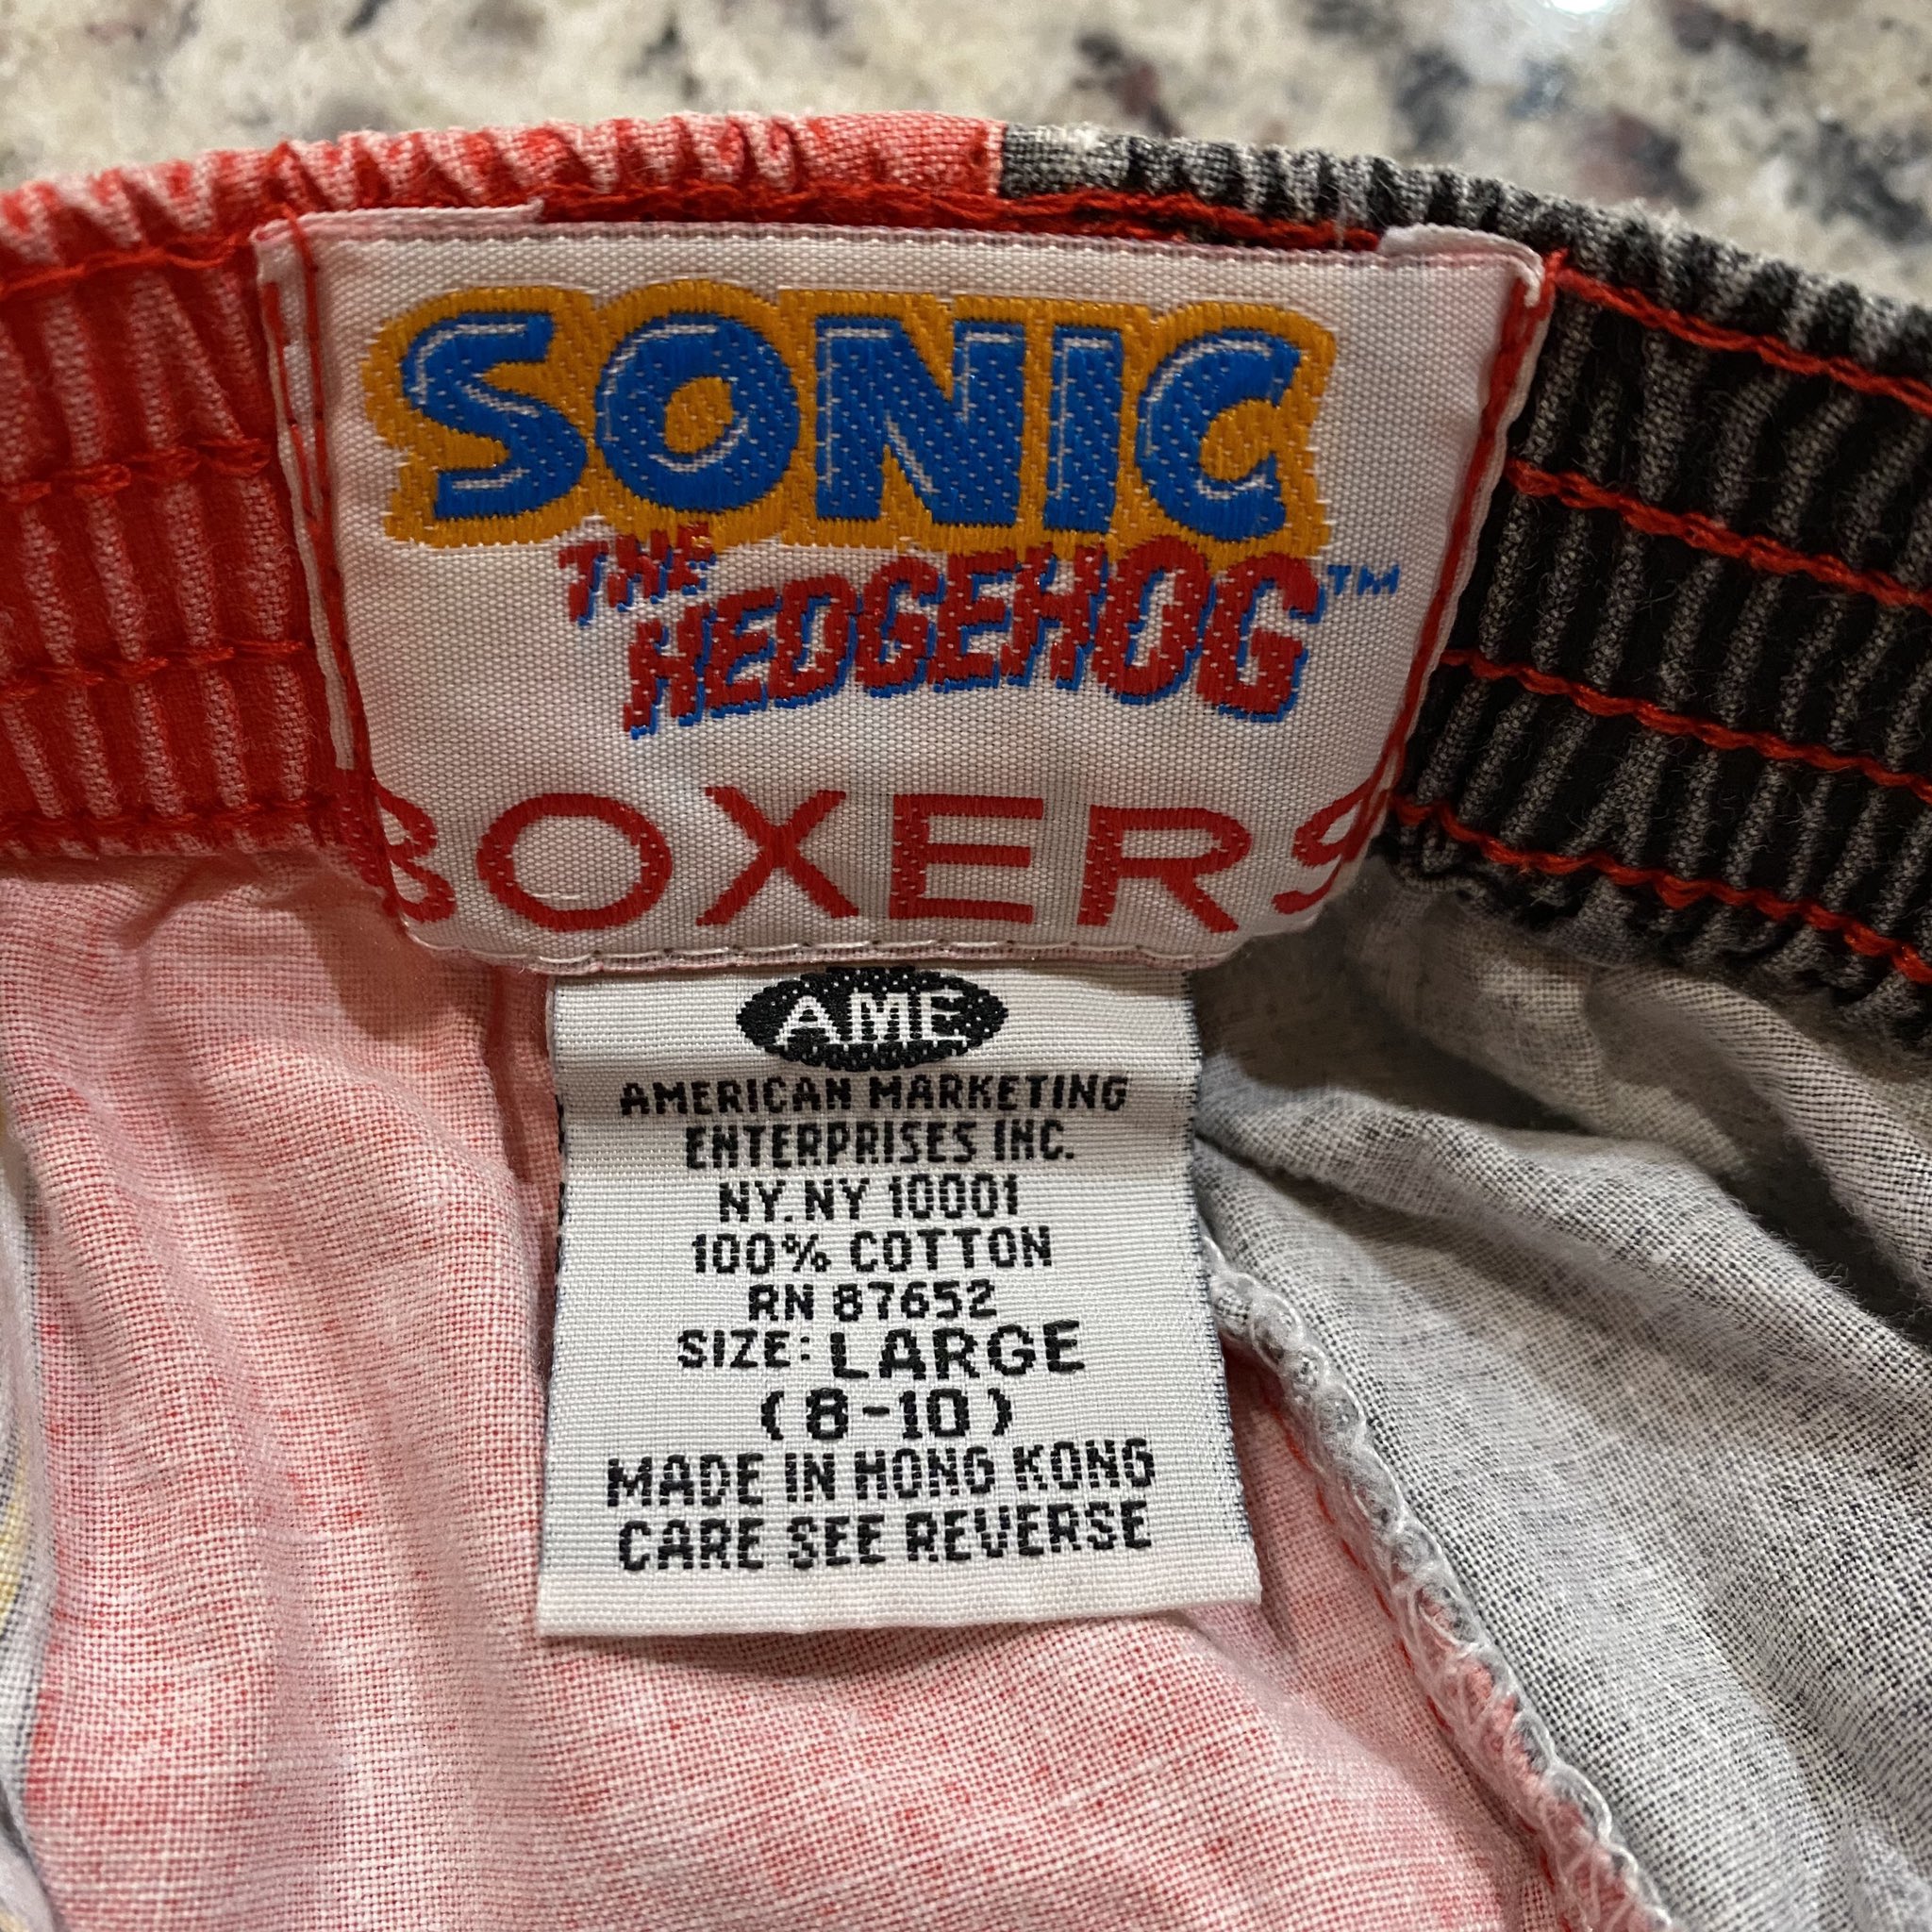 TreasureHuntingSonic on X: These #SonicMania boxers have started